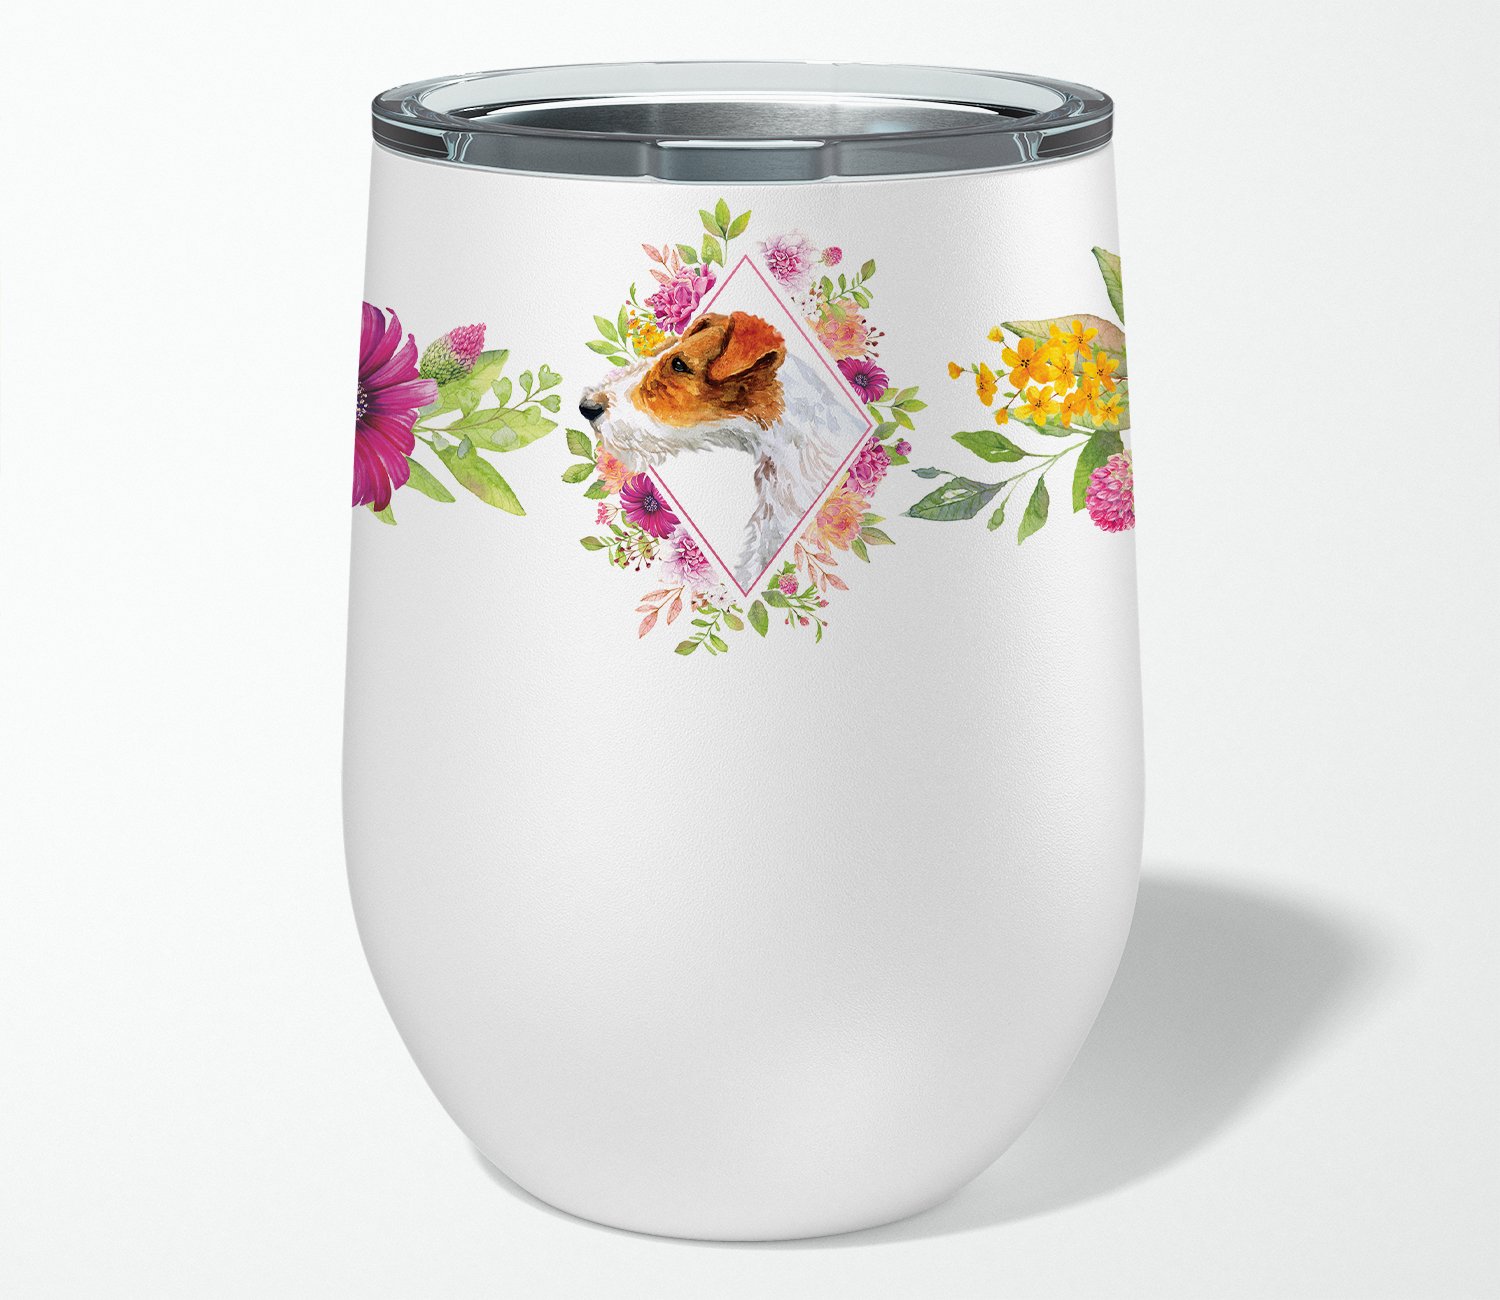 Jack Russell Terrier #2 Pink Flowers Stainless Steel 12 oz Stemless Wine Glass CK4142TBL12 by Caroline's Treasures